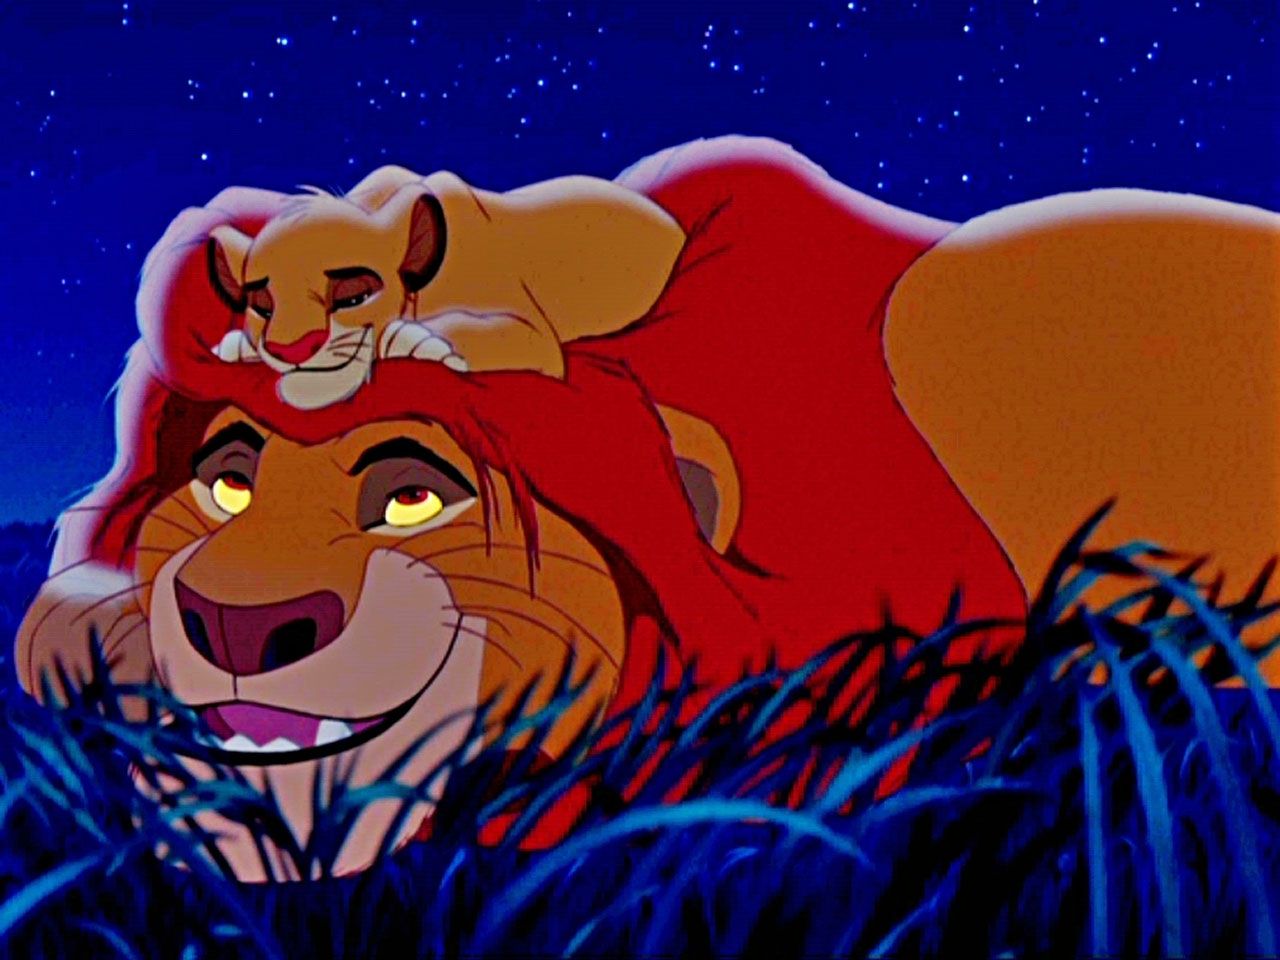 The lion king simba and nala in a grassy field - The Lion King